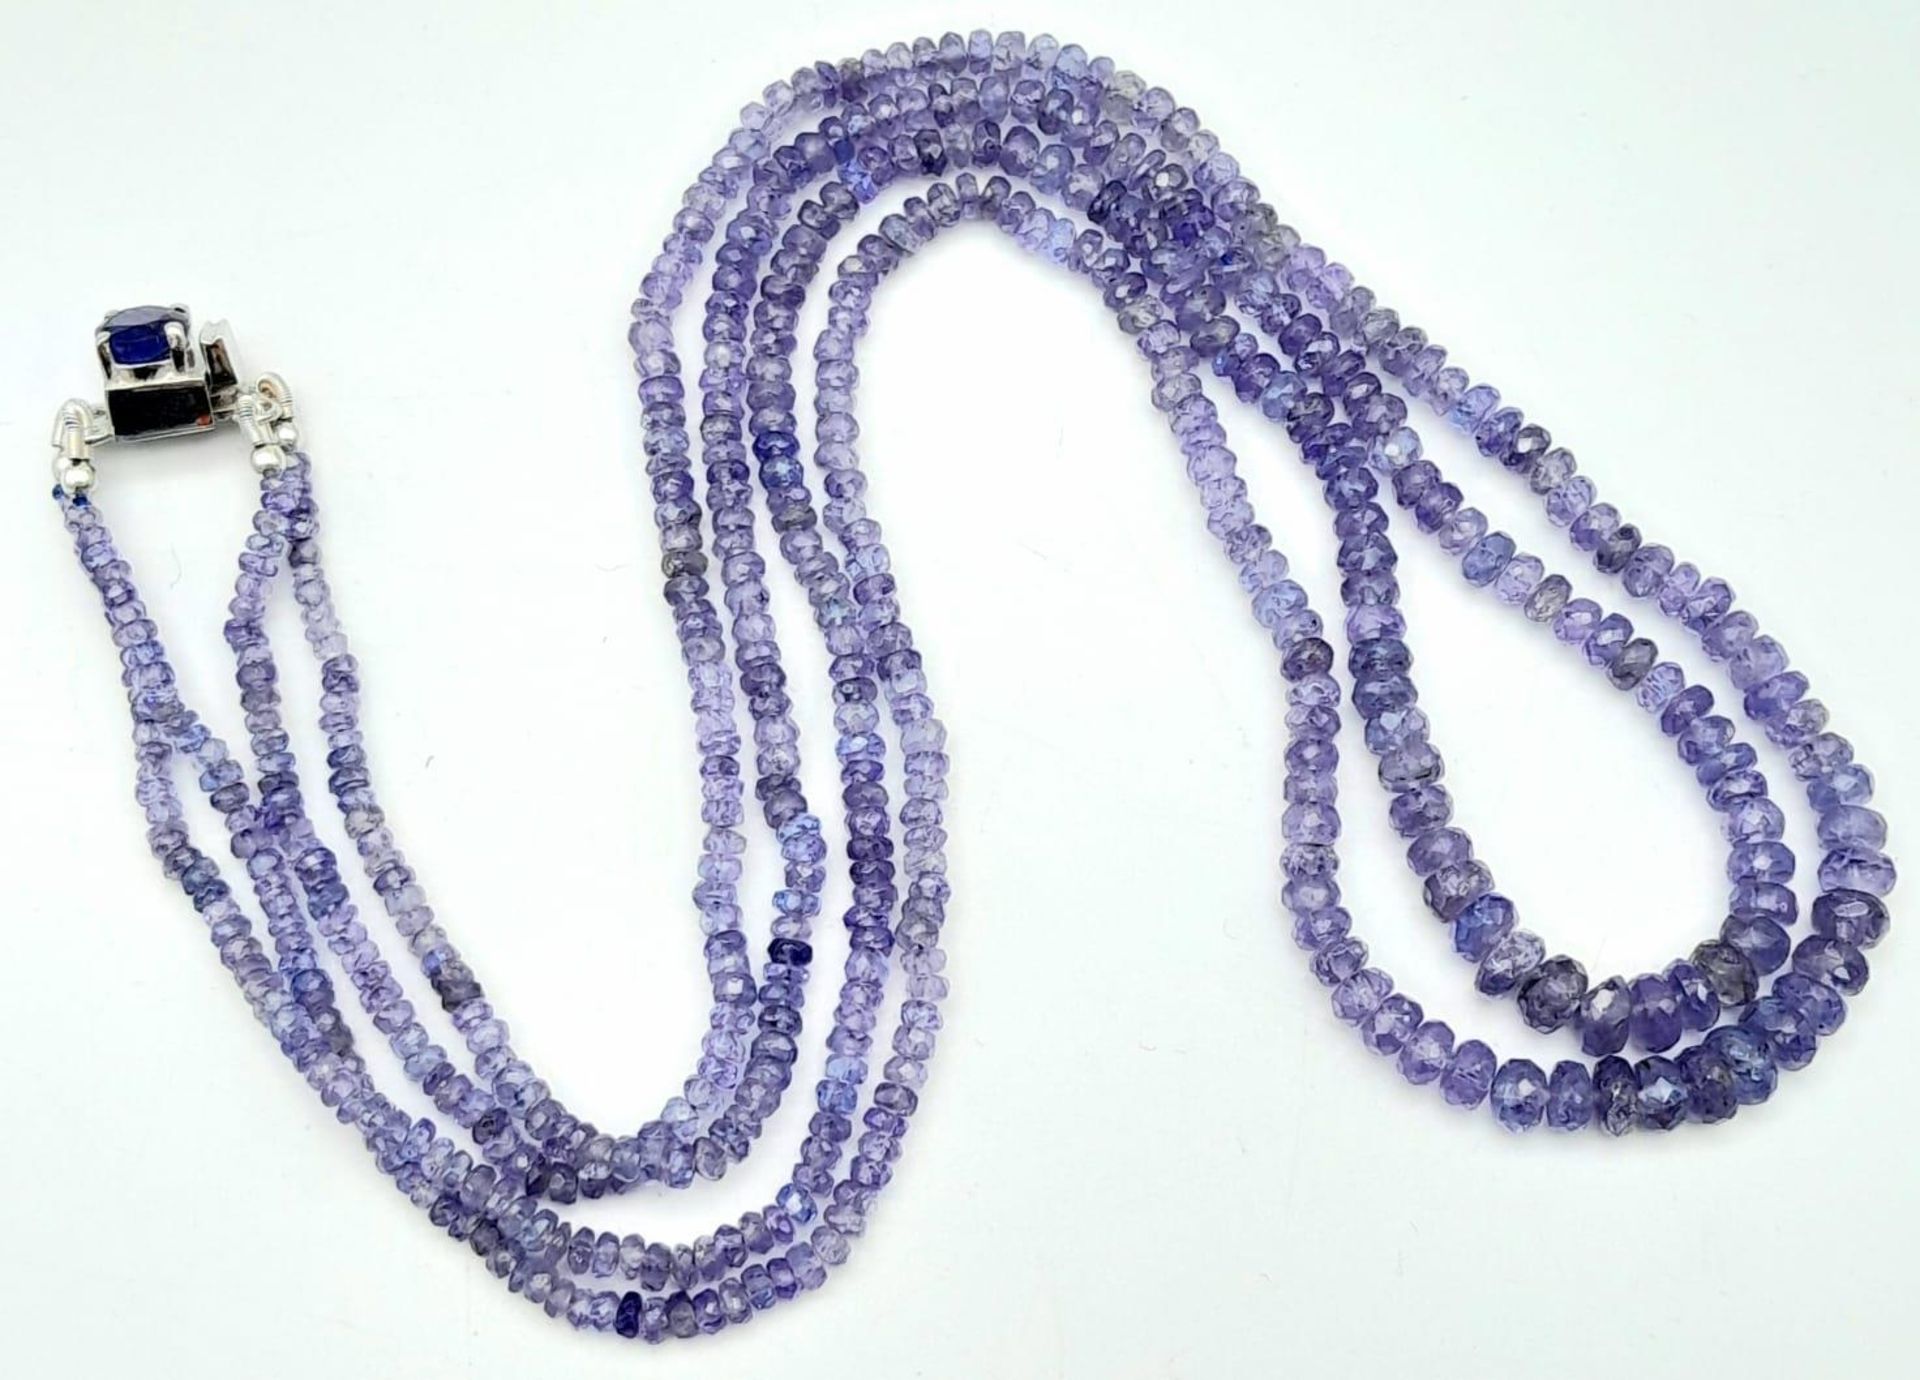 A 100ctw Two Row Tanzanite Necklace with a Sapphire and 925 Silver Clasp. 48cm length, 20.3g total - Bild 4 aus 6